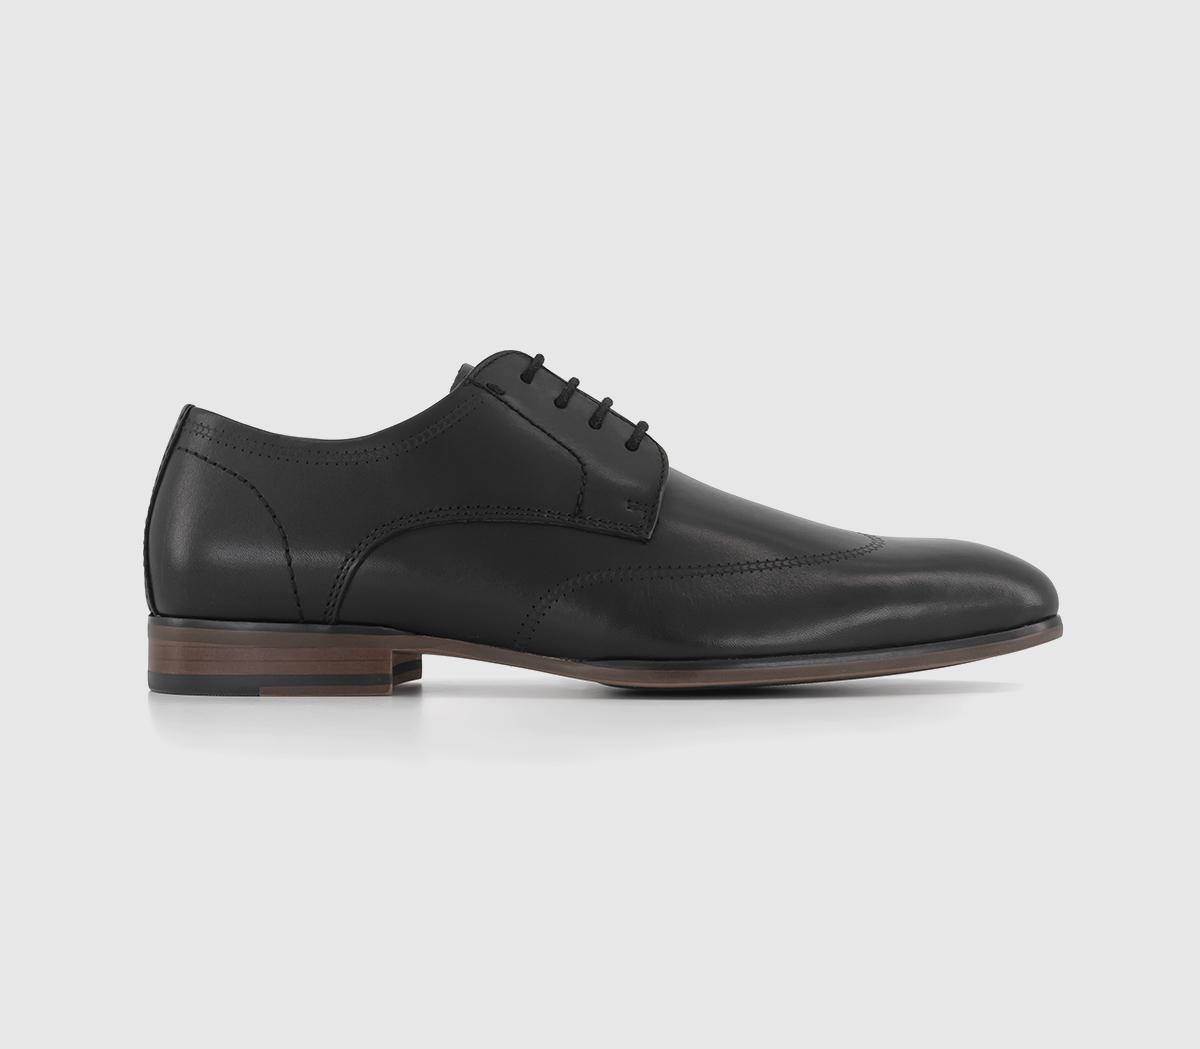 OFFICEMagnus Wingcap Leather Oxford ShoesBlack Leather